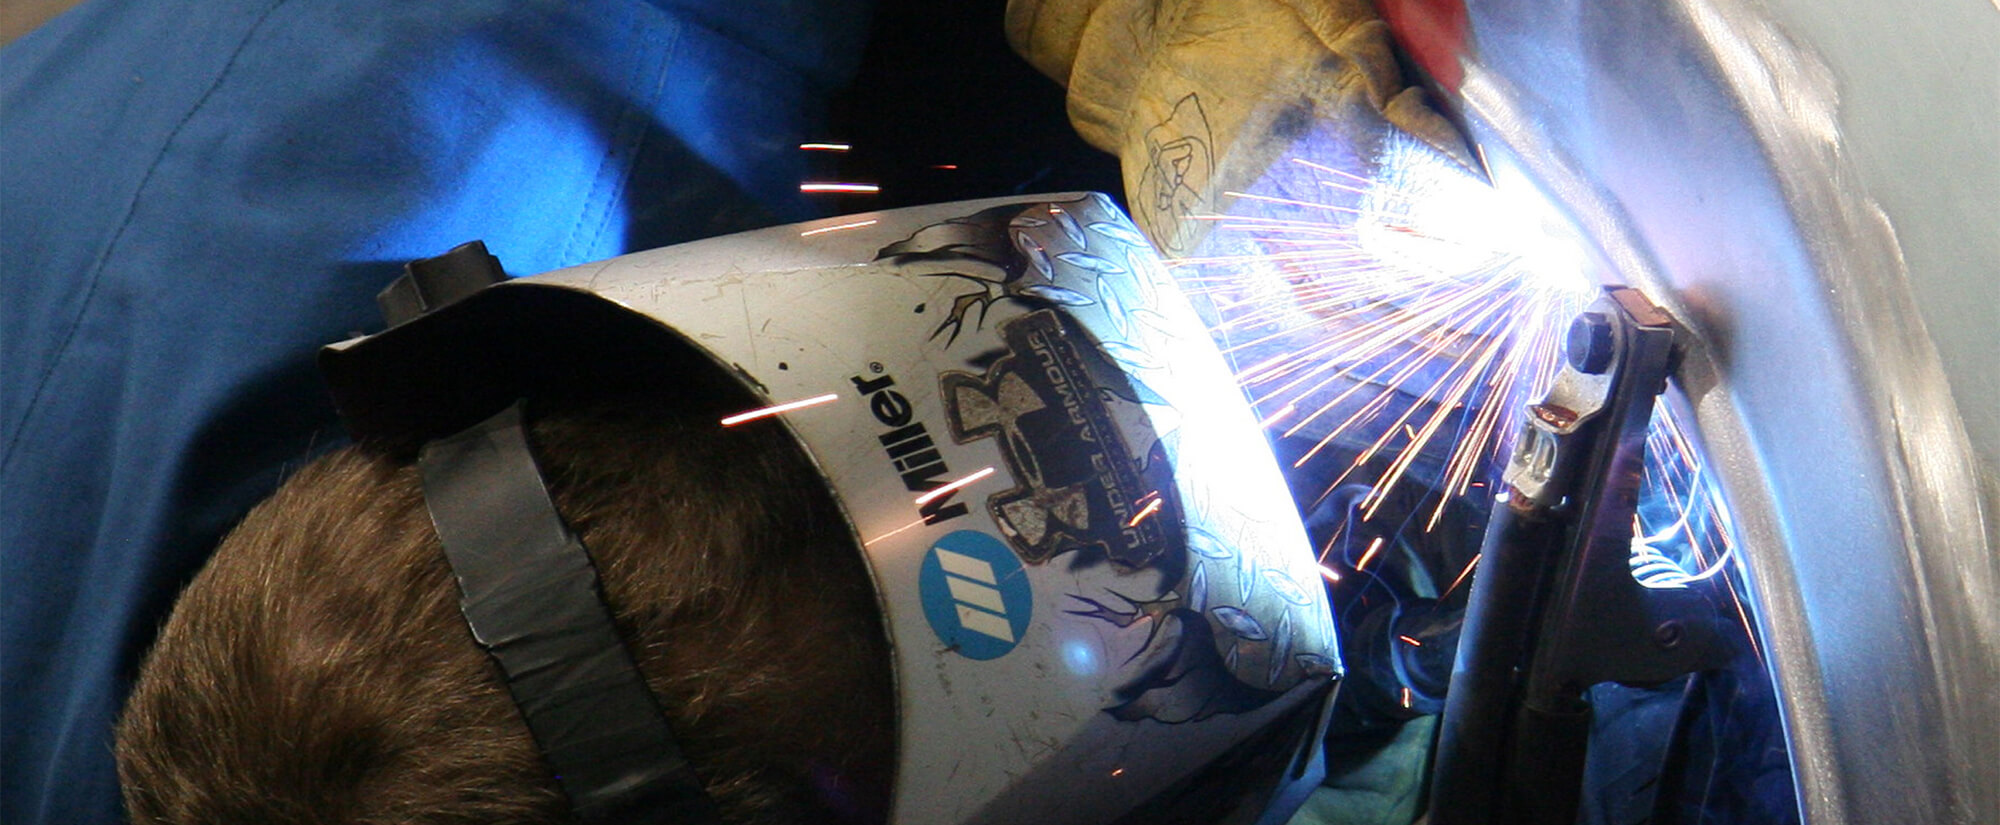 up close photo of a student wearing protective gear while working on a car